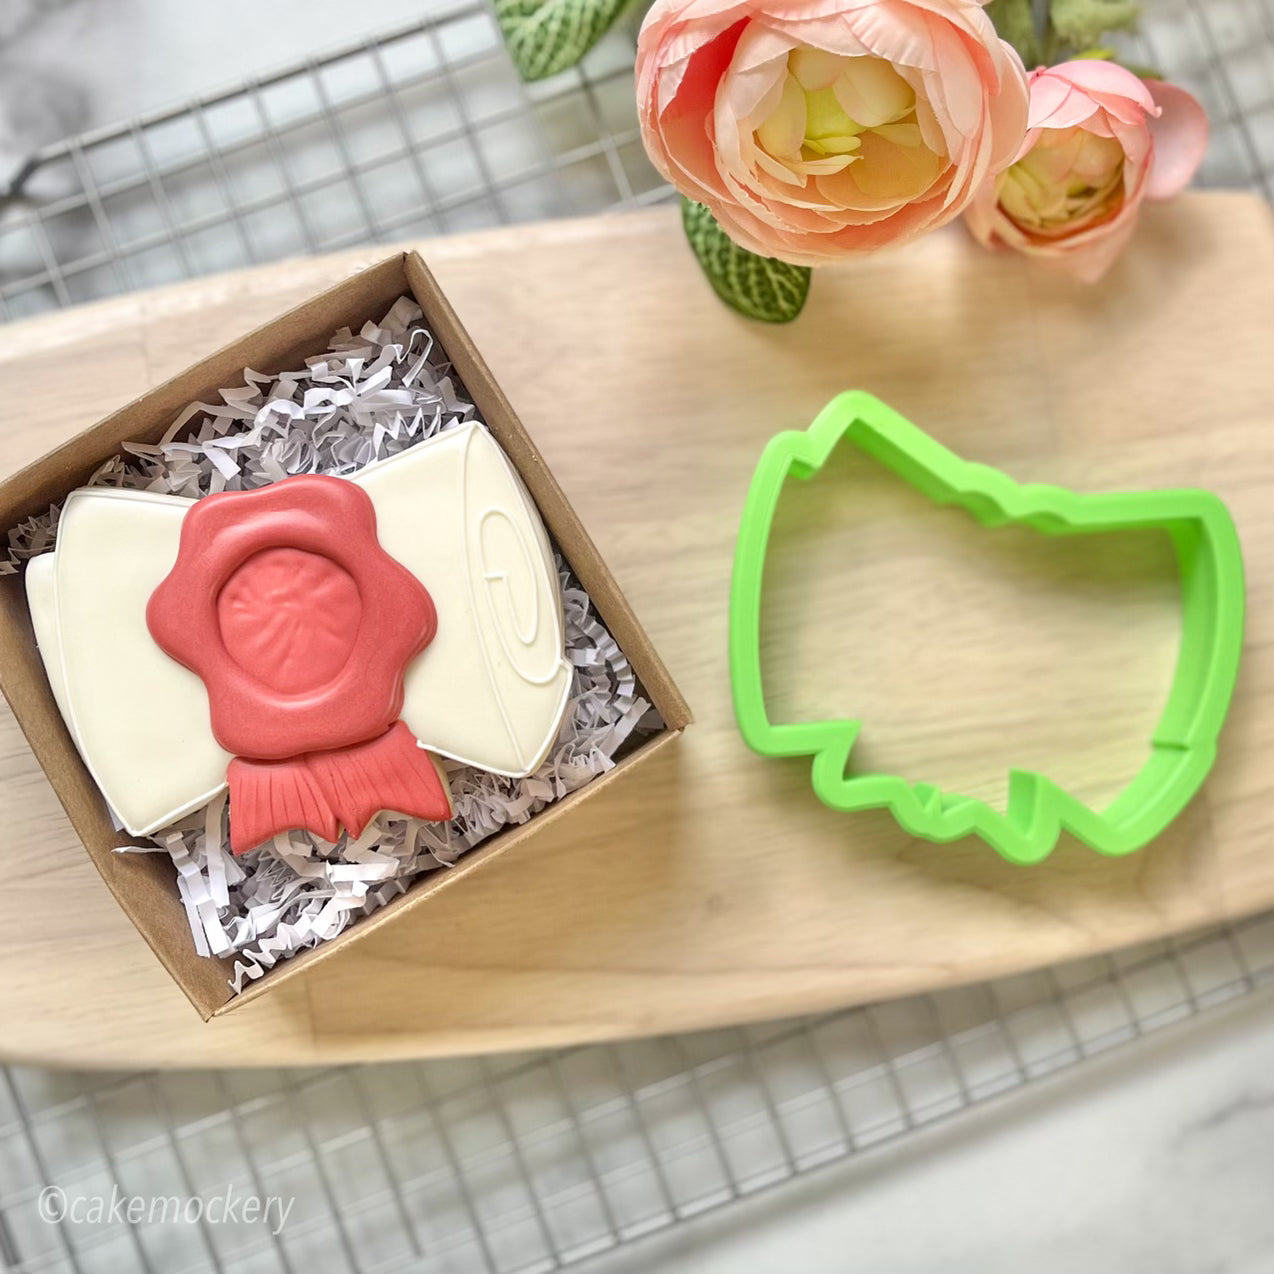 Grad Hat Diploma Set of 2 Cookie Cutters